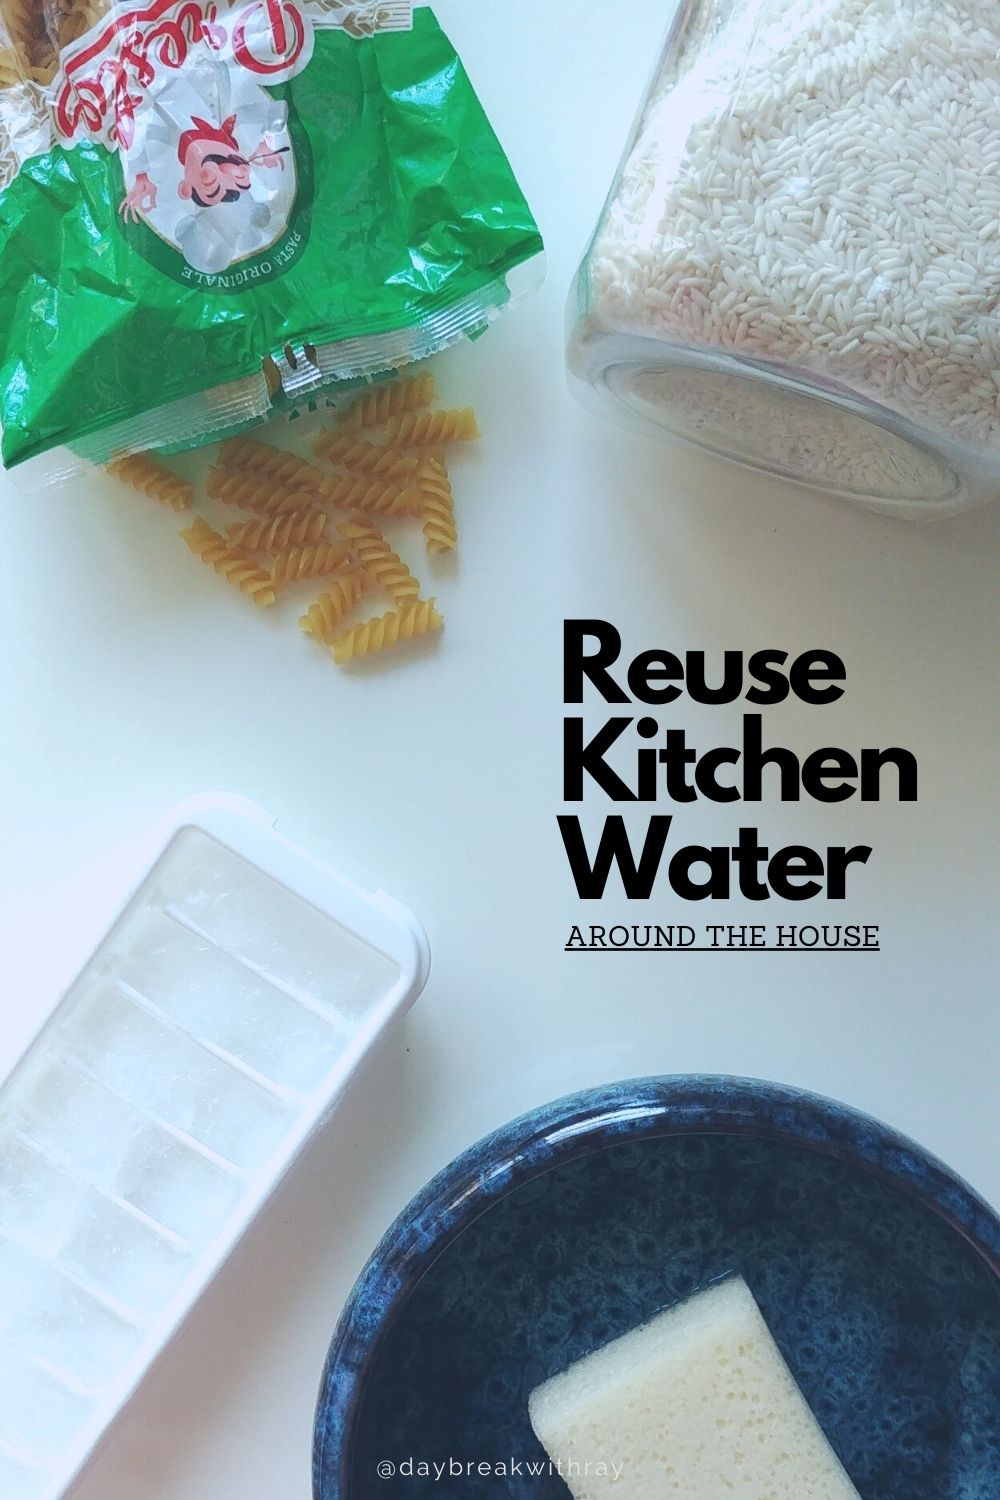 How to Reuse Kitchen Water Around the House